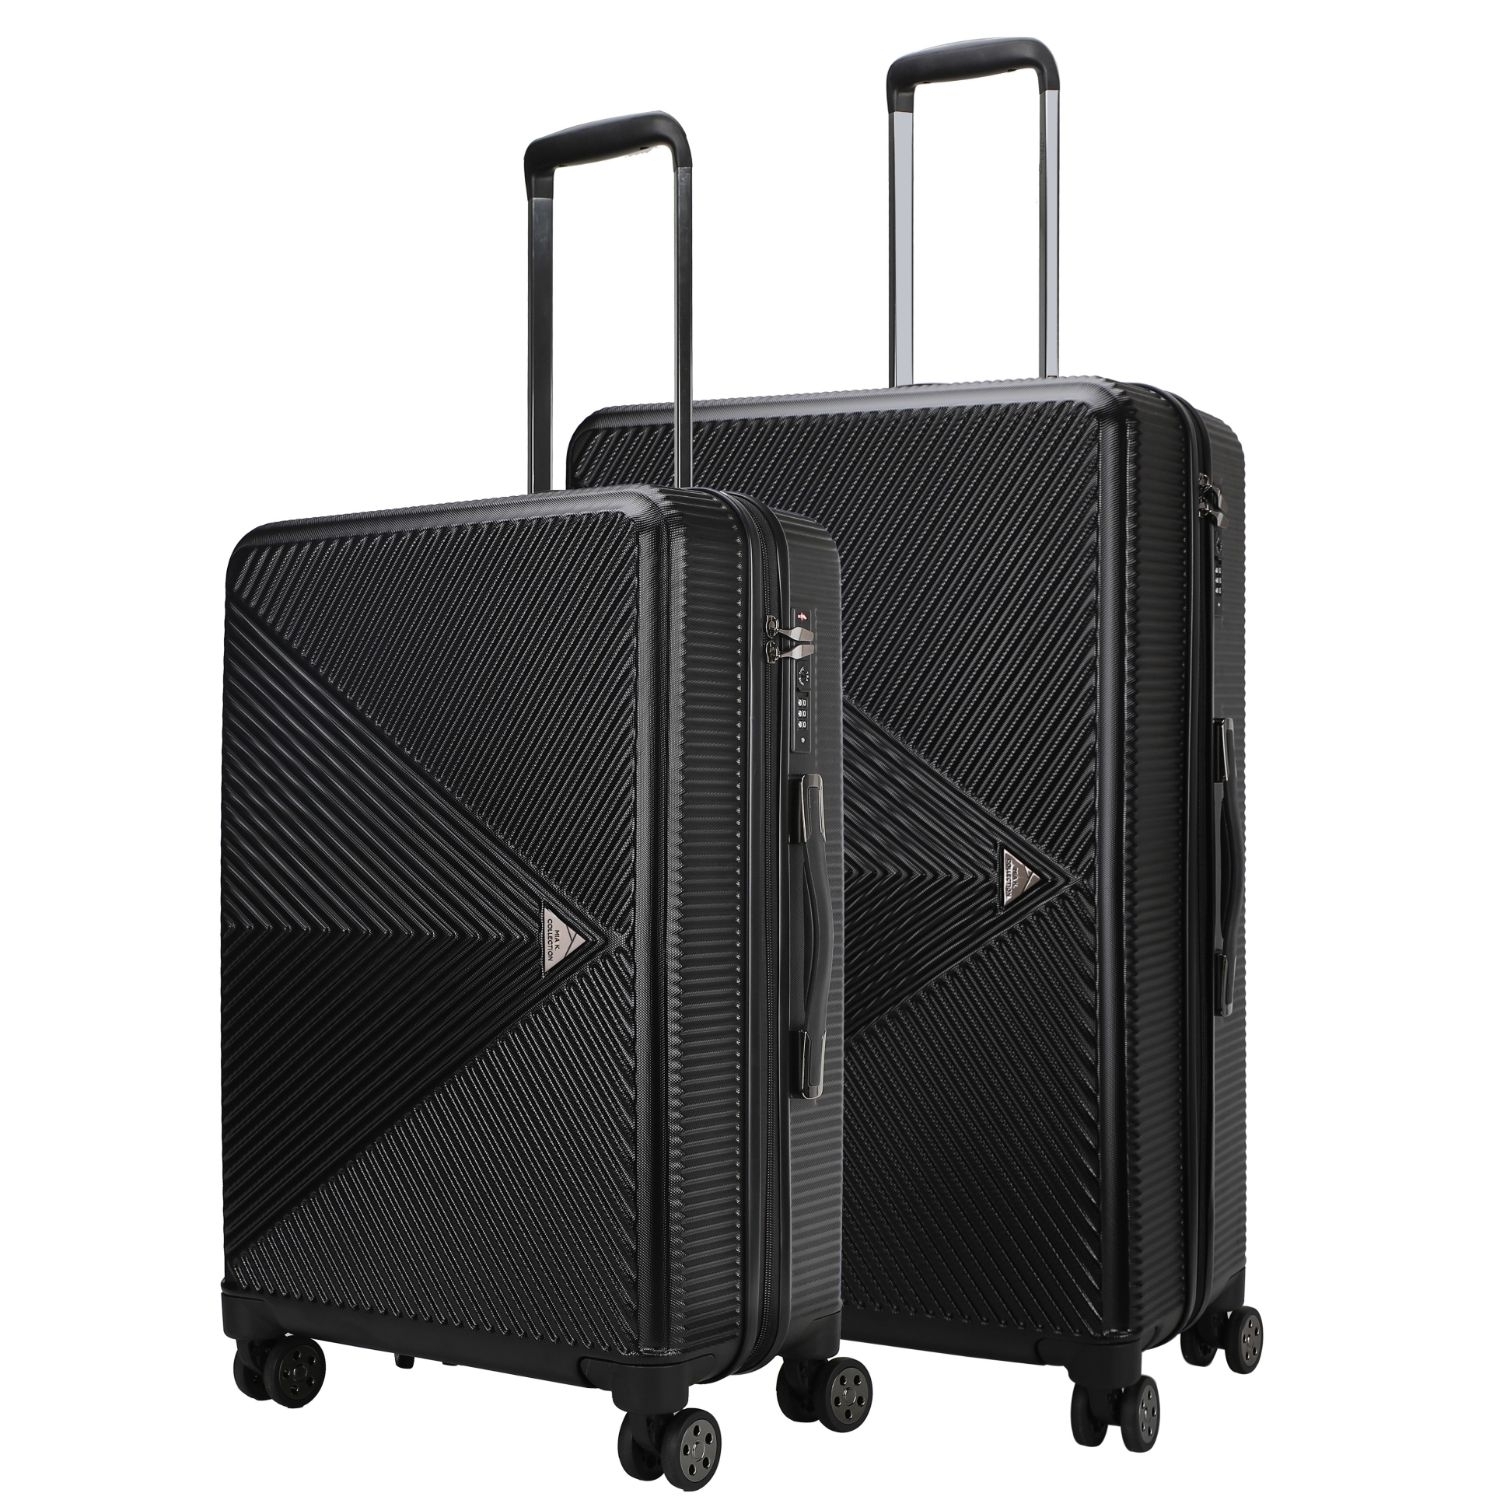 MKF Collection Felicity Luggage Set Extra Large And Large By Mia K- 2 Pieces - Black